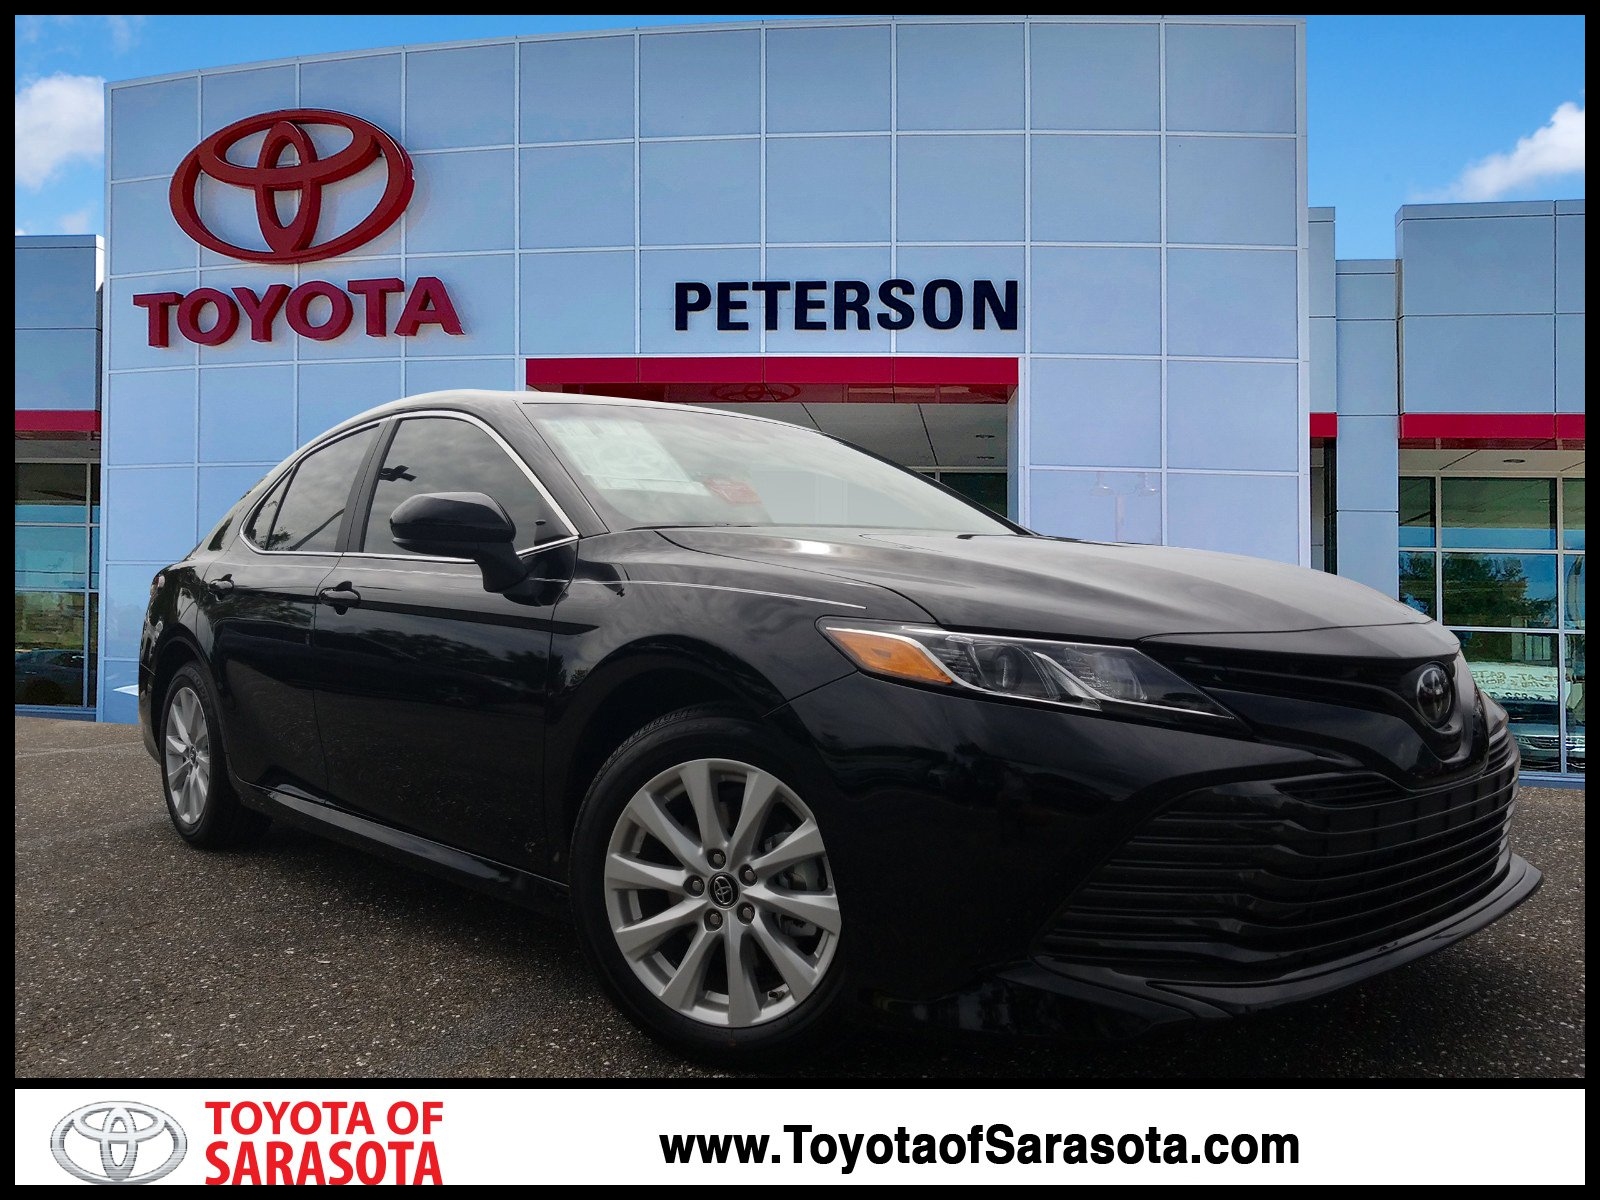 New 2018 Toyota Camry LE